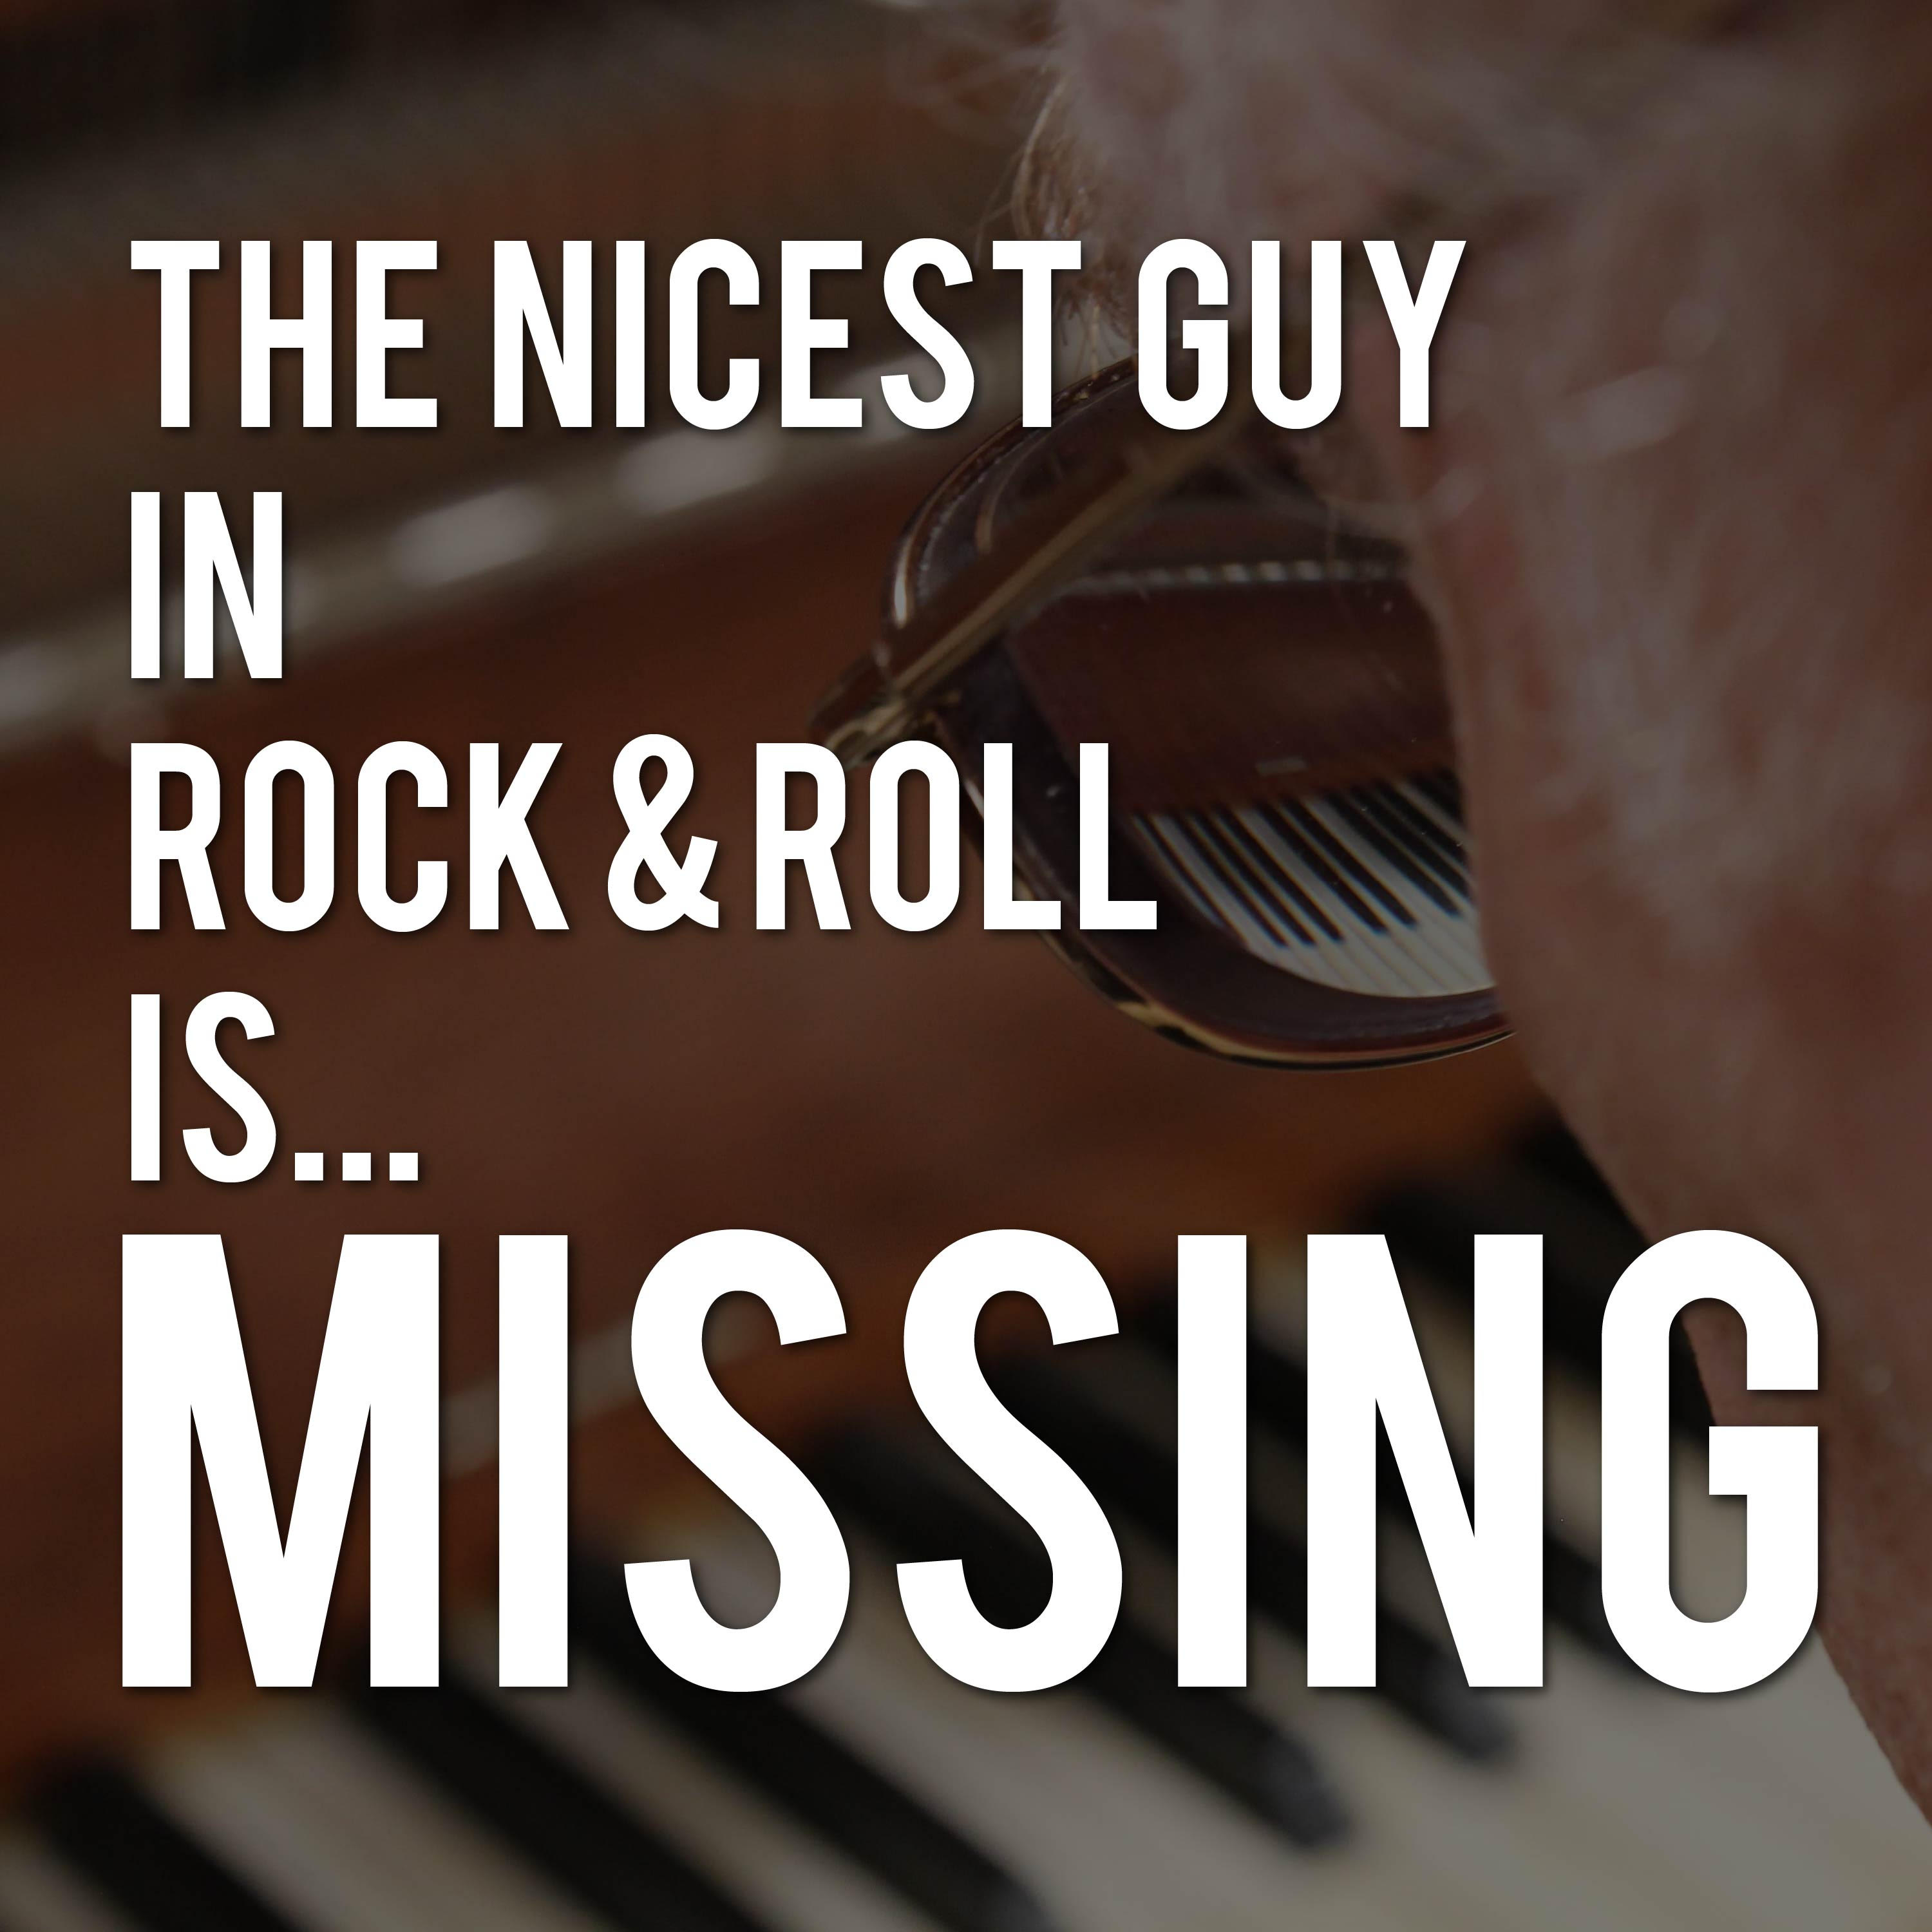 The Nicest Guy in Rock & Roll is Missing